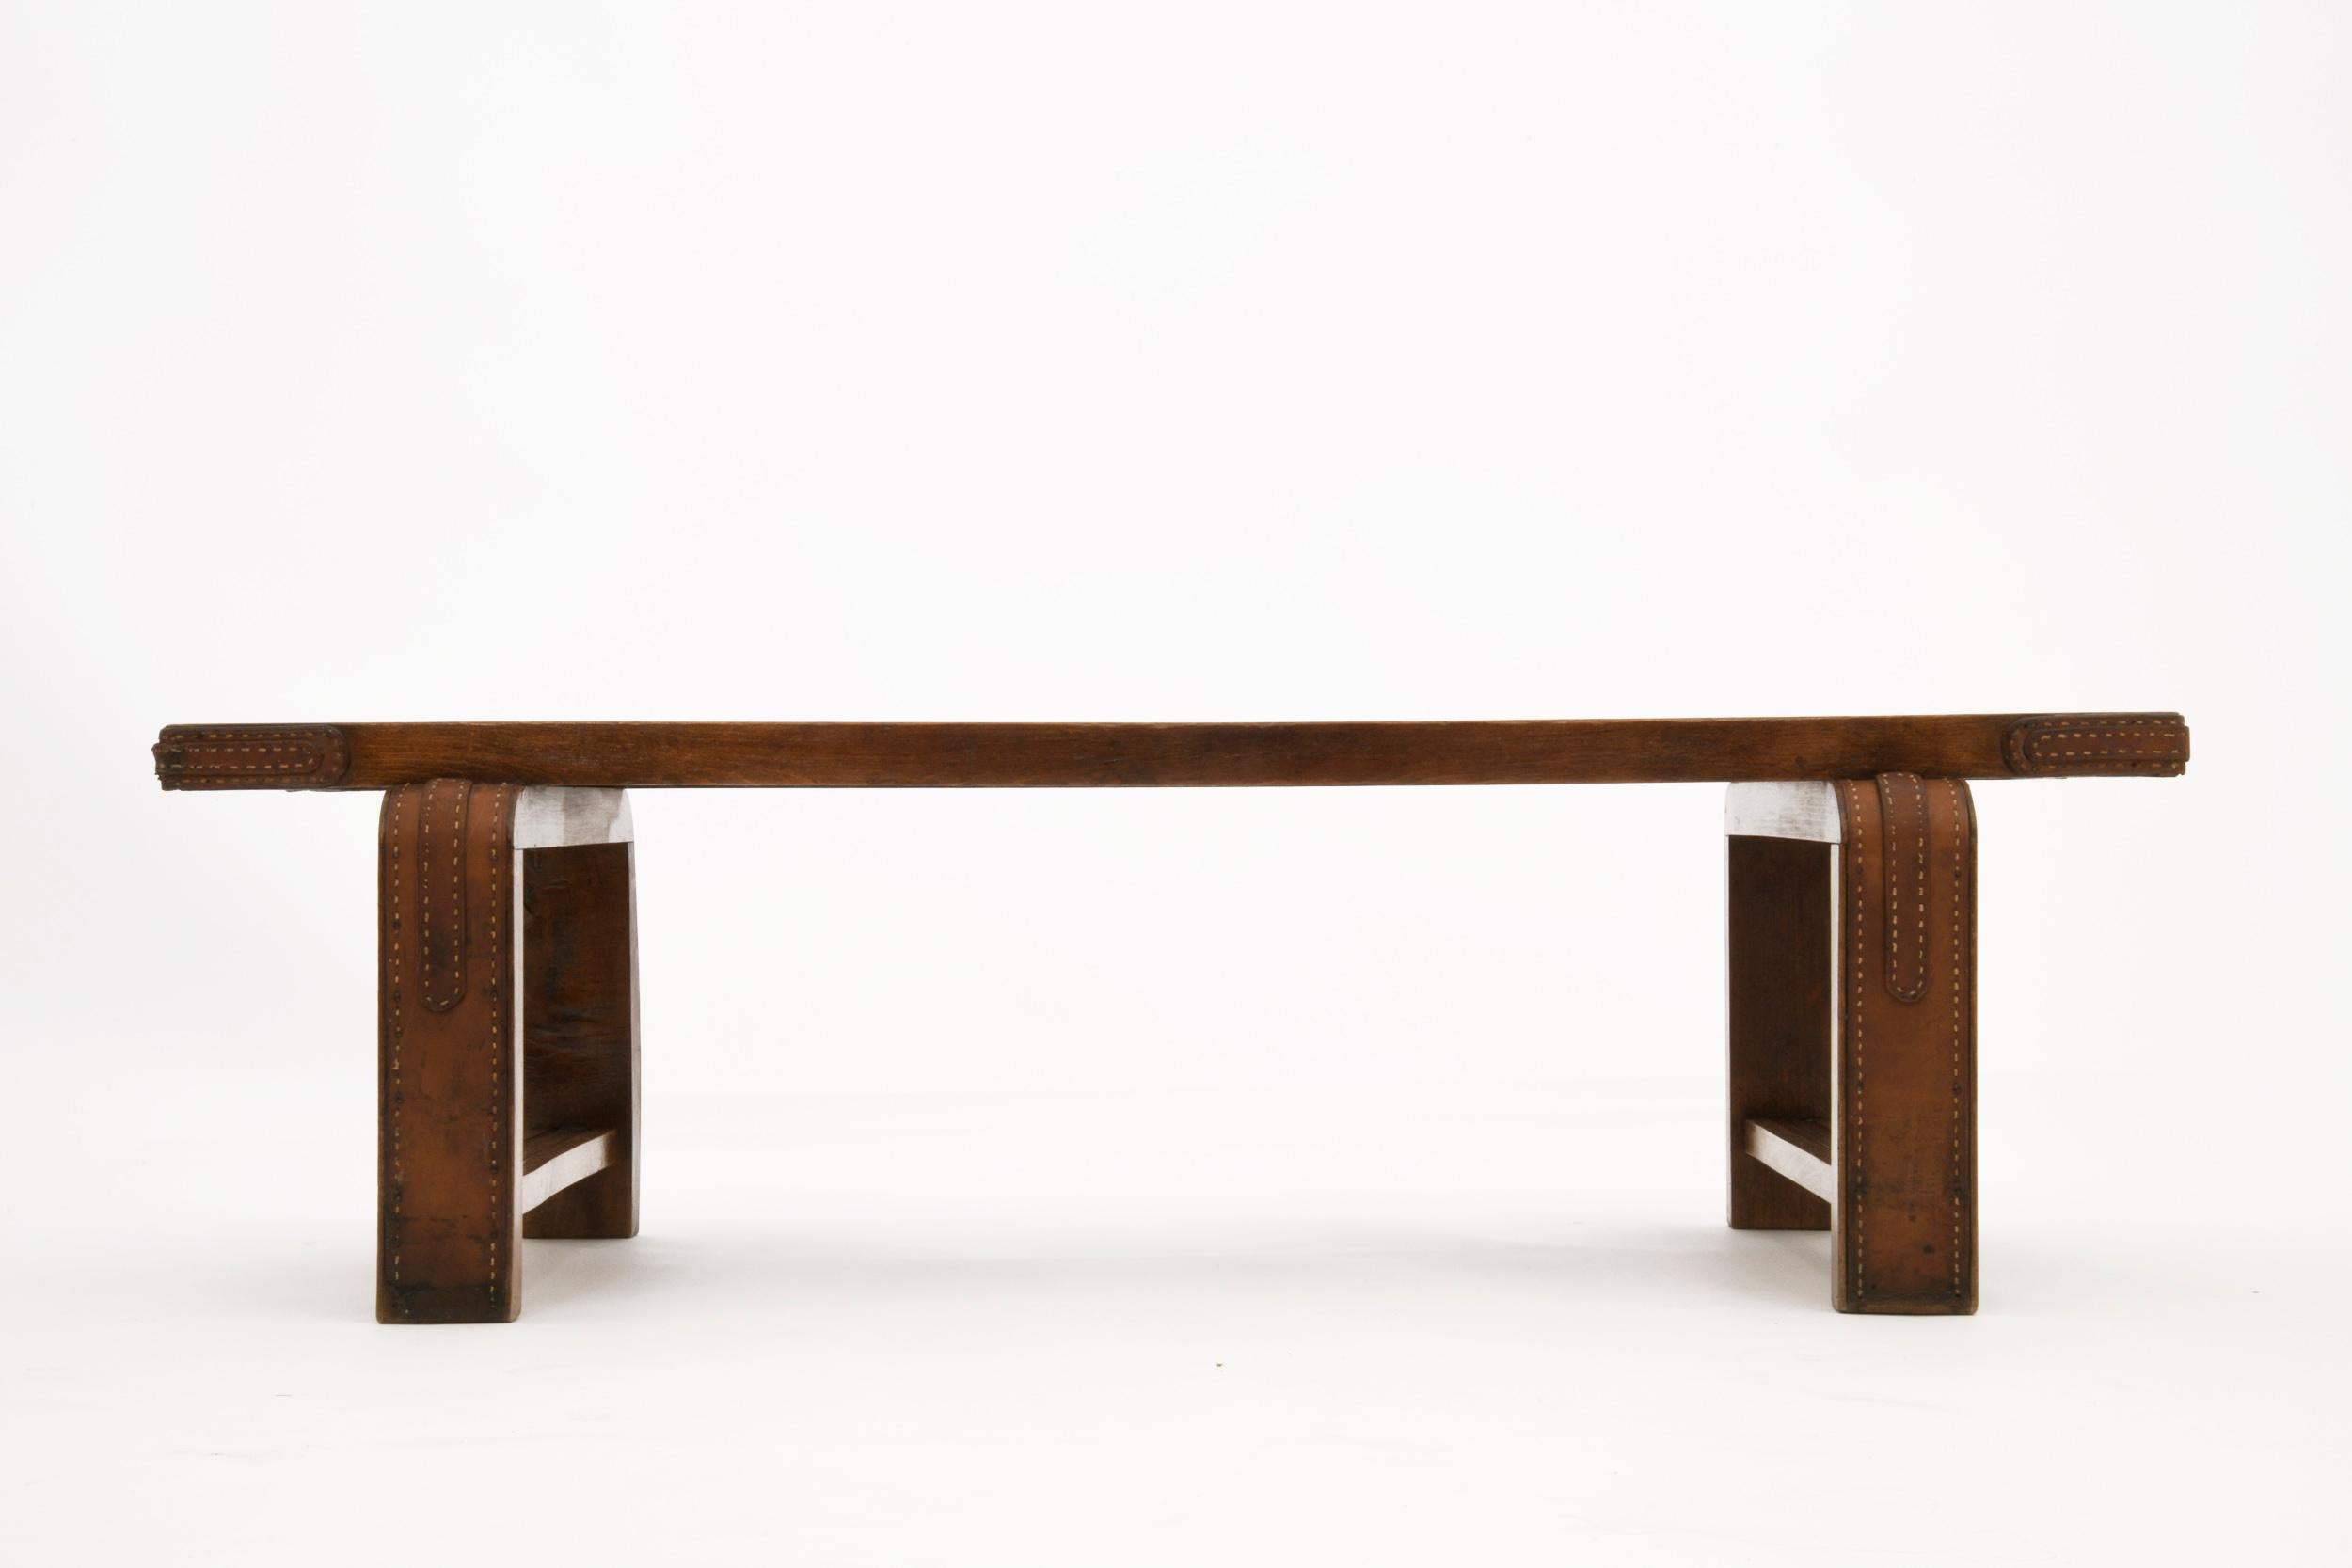 Beautiful luggage bench by Jacques Adnet, which could also be use as a coffee table, in oak detailed with stitched leather in legs and corners.